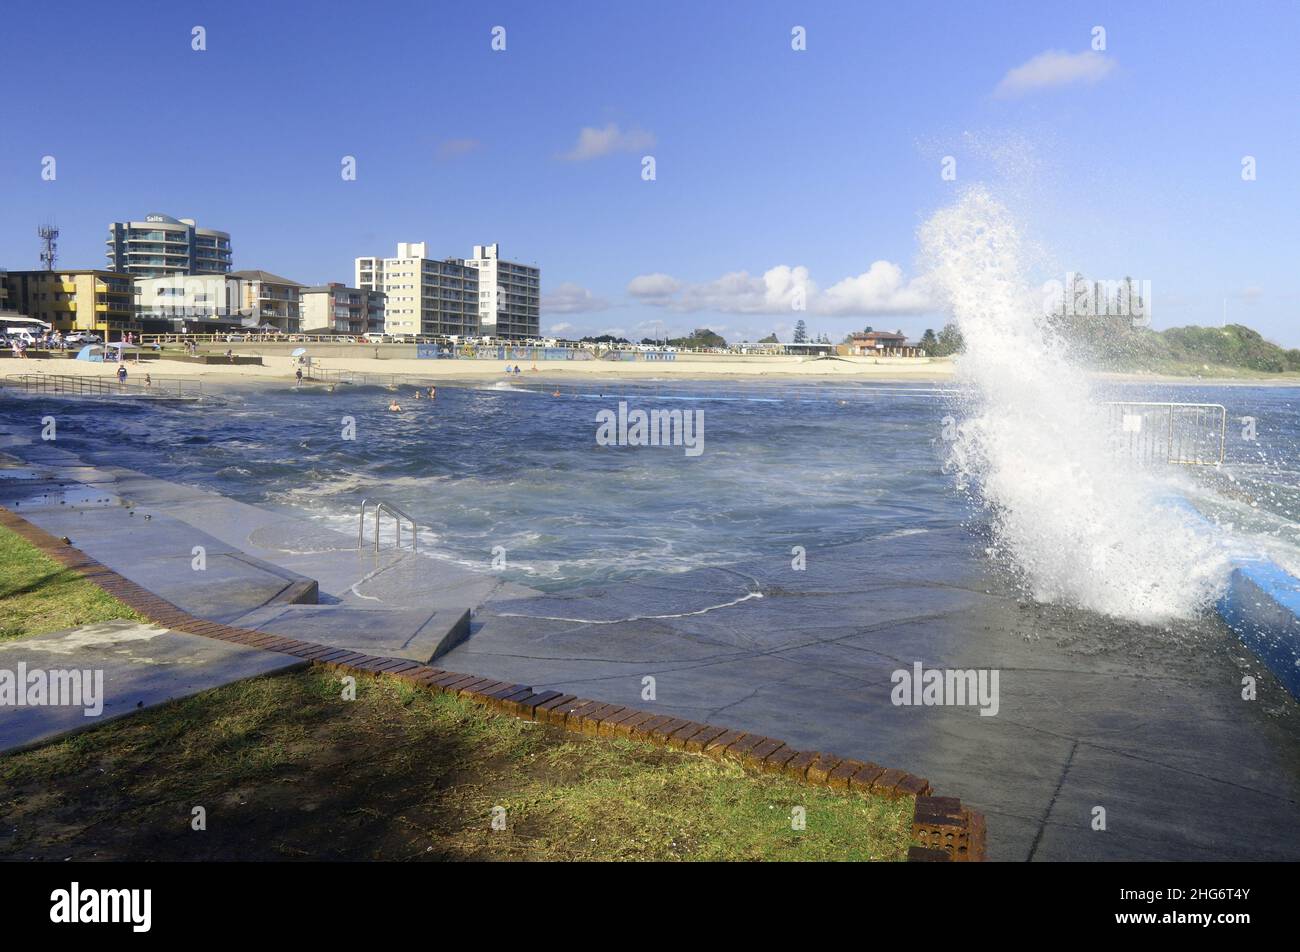 Rough conditions at the ocean pool due to swells from ex-Tropical Cyclone Seth, Forster, New South Wales, Australia. No MR or PR Stock Photo